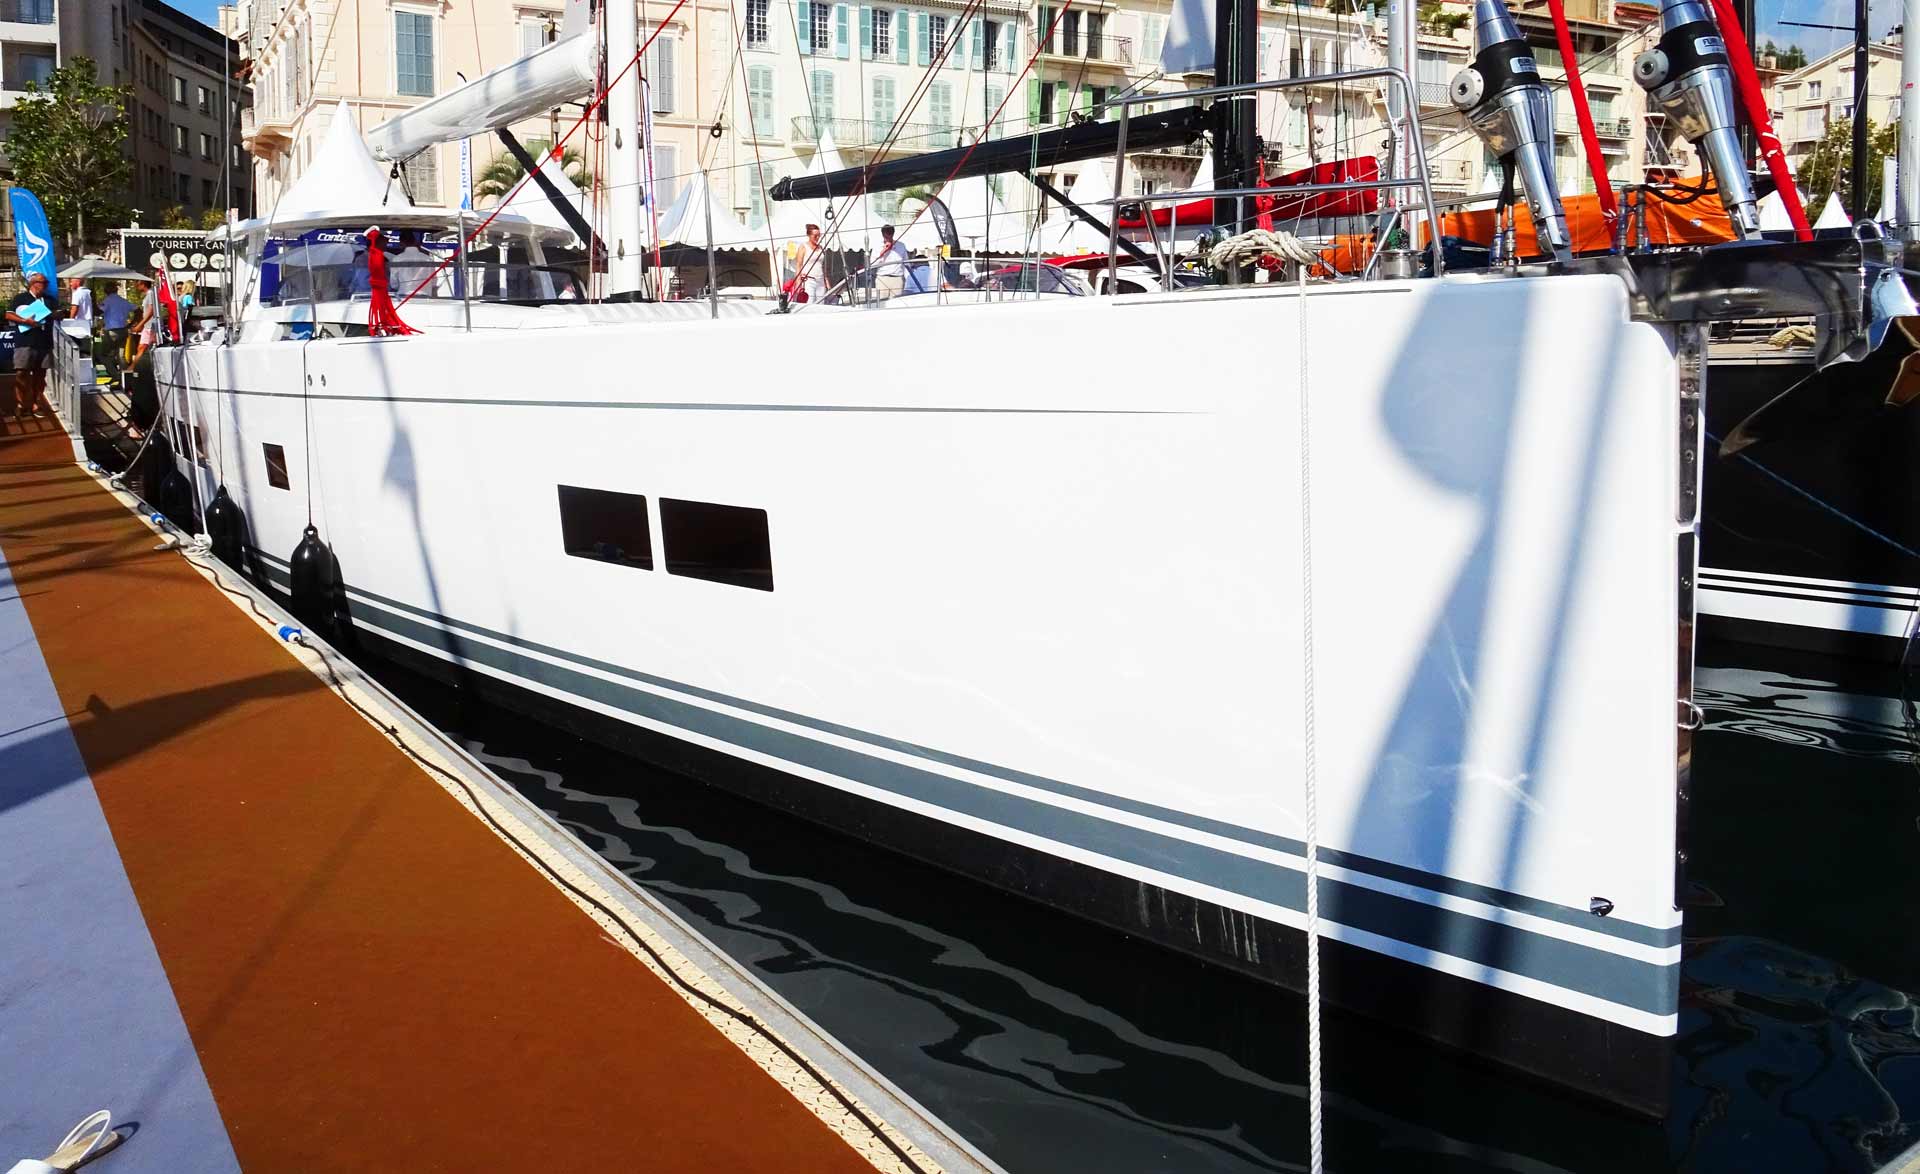 That´s the world´s largest production sailing yacht: The Hanse 687.